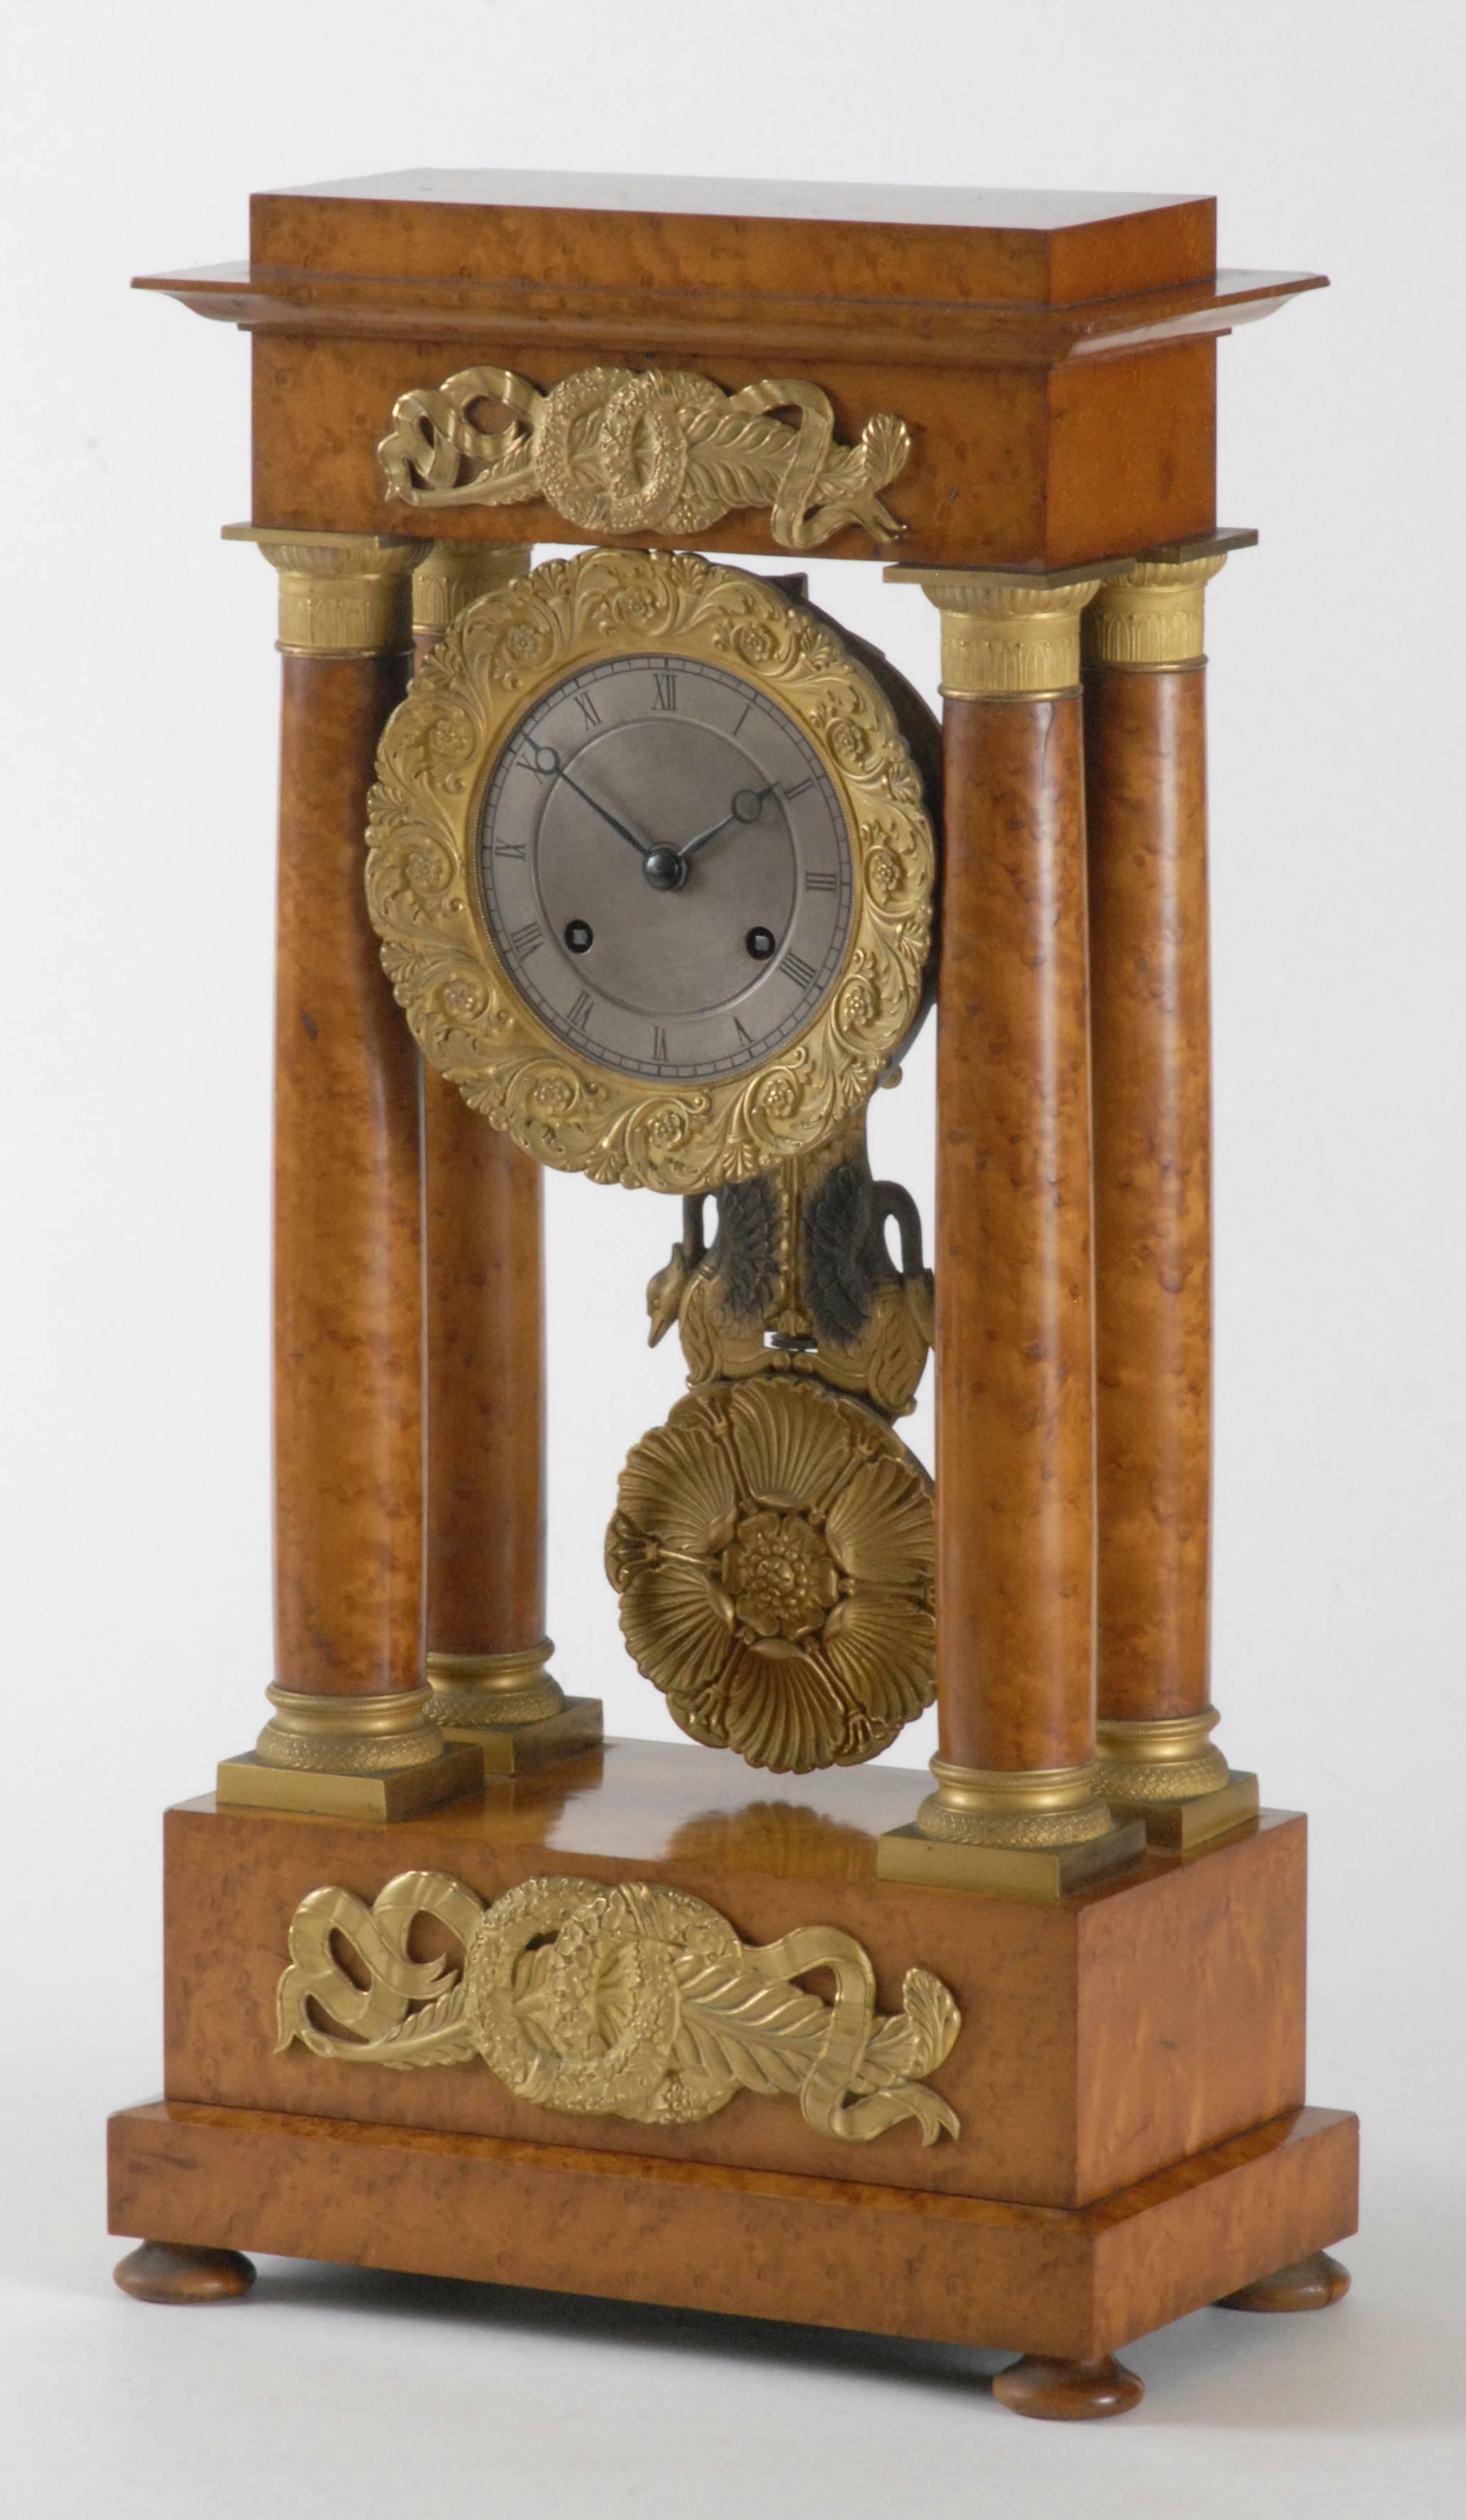 A brilliant French portico clock with ormolu mounts and pendulum mounted with 2 swans with 'blackened' necks and wings.
The timber is gleaming with its original finish. The timber is a highly decorative burr veneer over a solid timber case.
The